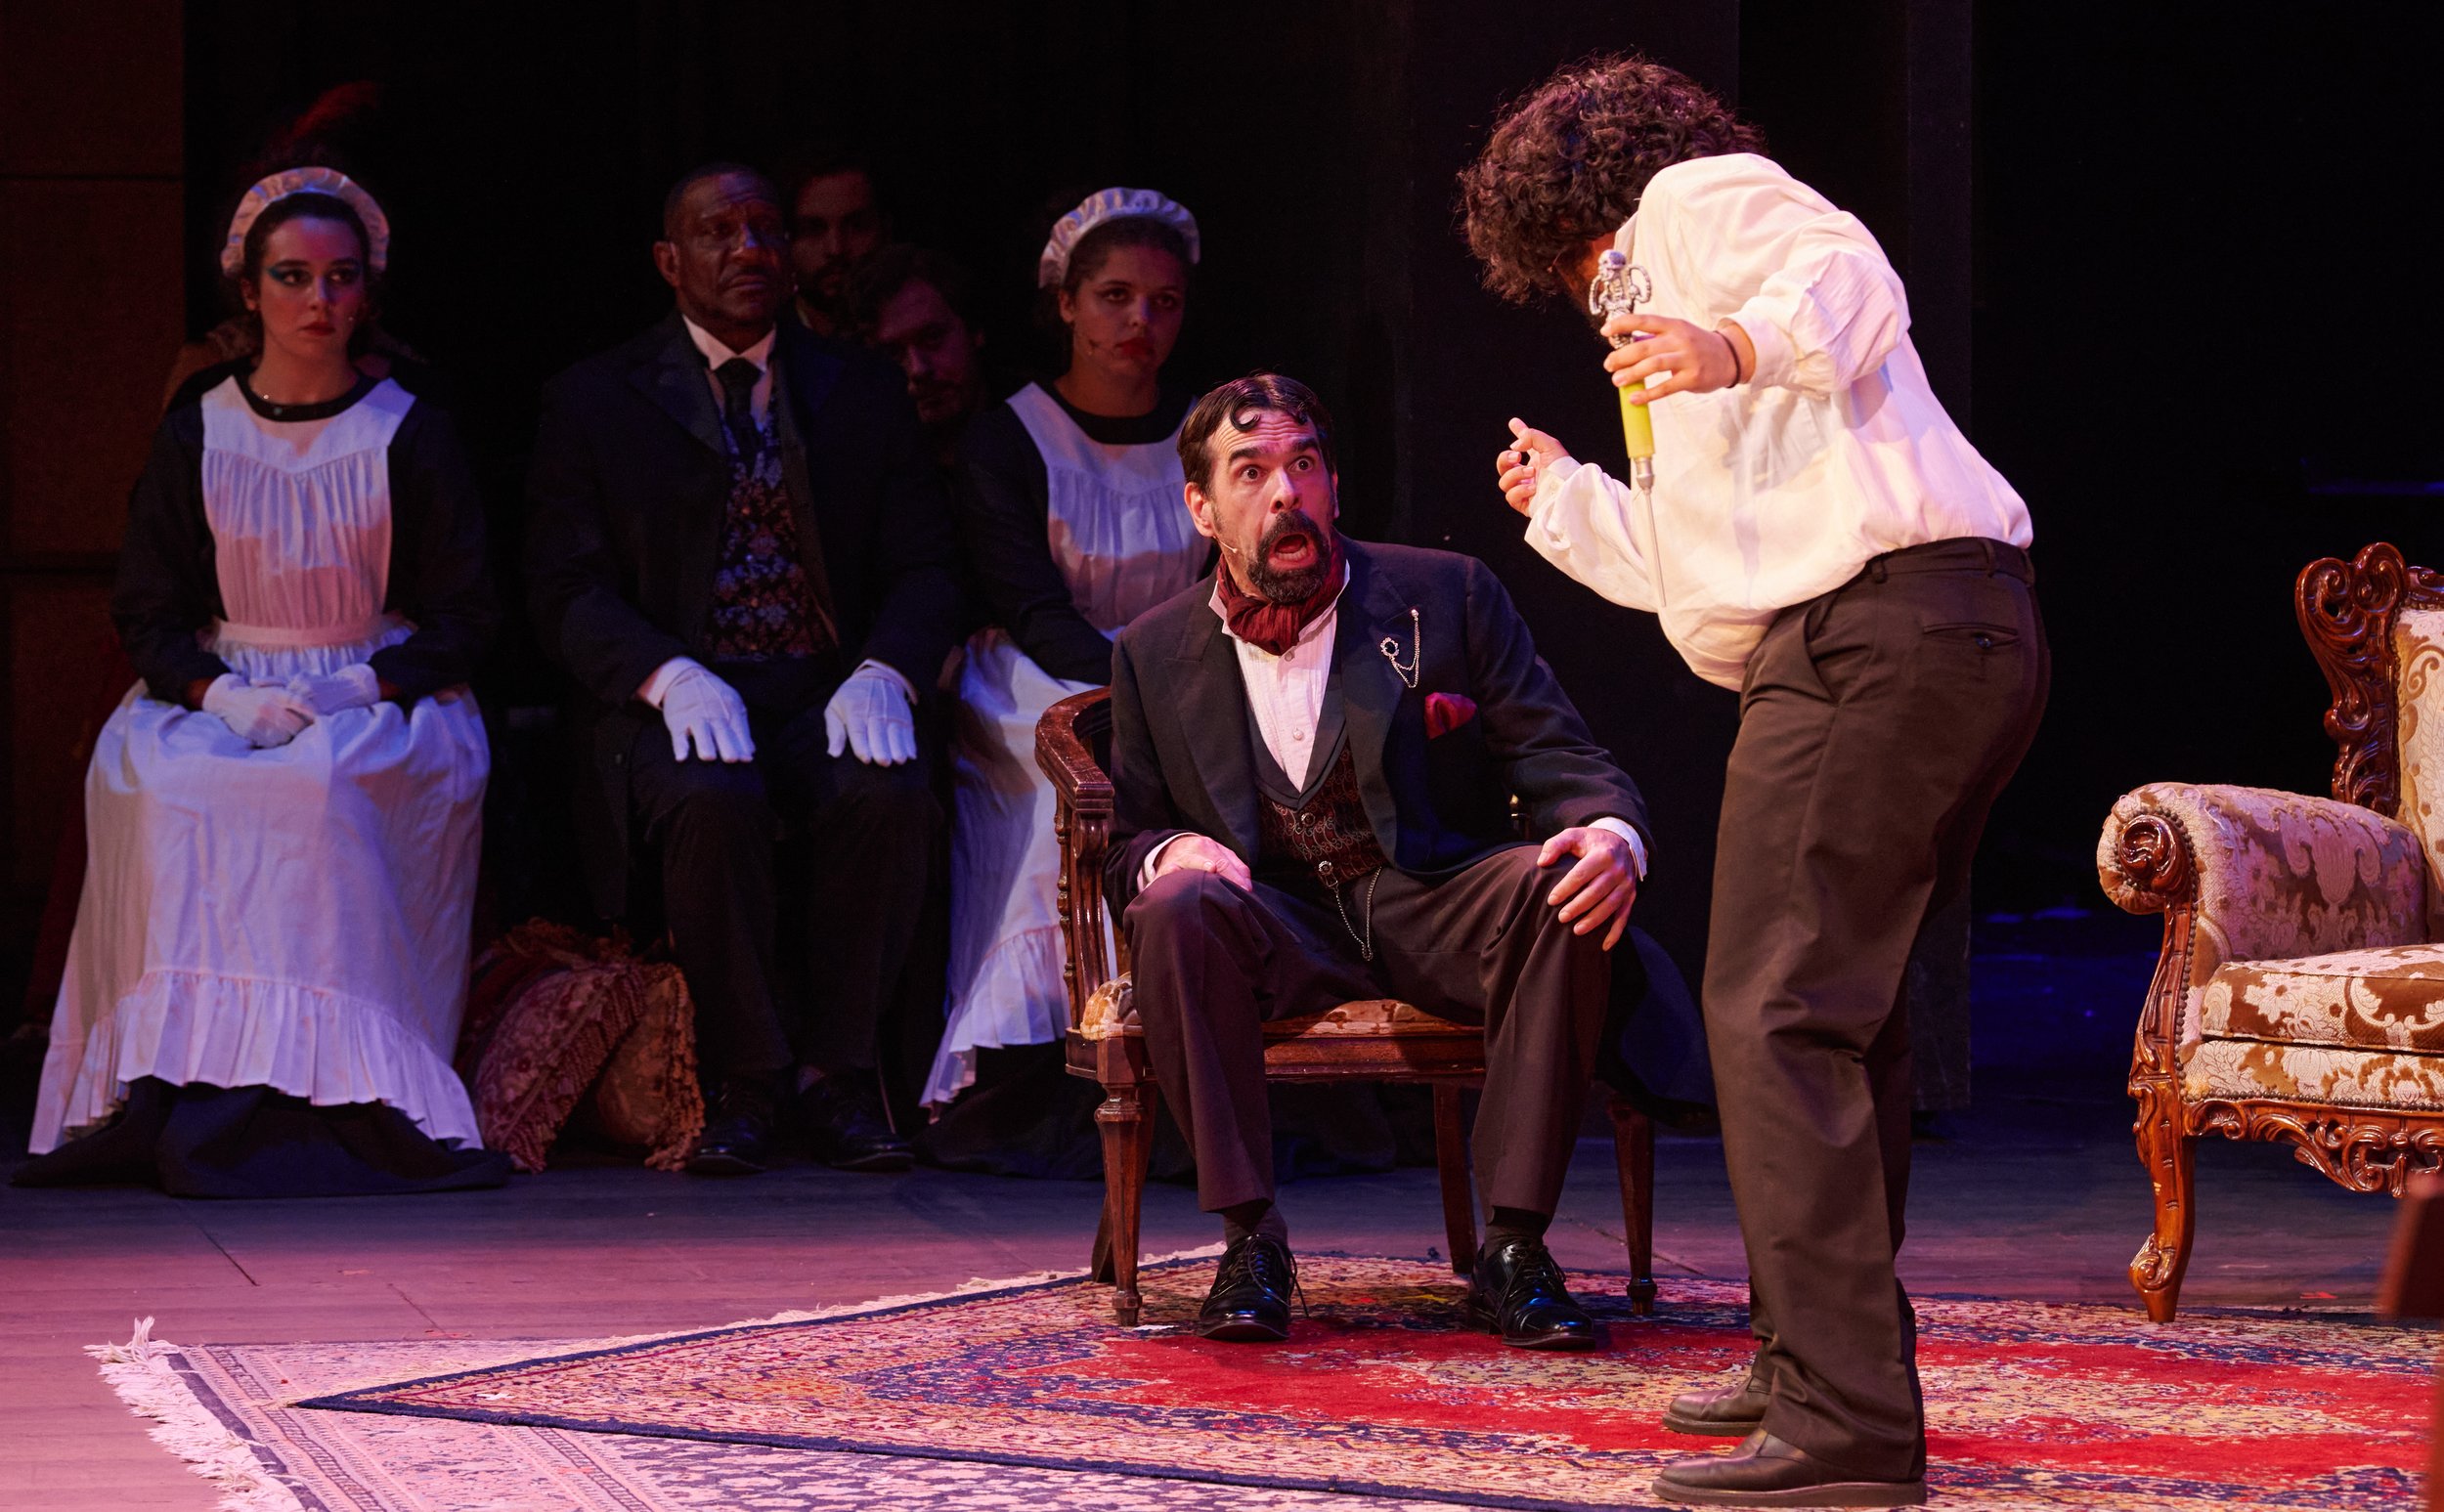  Justin Lescoulie (left) and A.J. Sohrabi (right) perform with other cast members at a dress rehearsal of "The Strange Case of Dr. Jekyll &amp; Mr. Hyde" on March 28. (Nicholas McCall | The Corsair) 